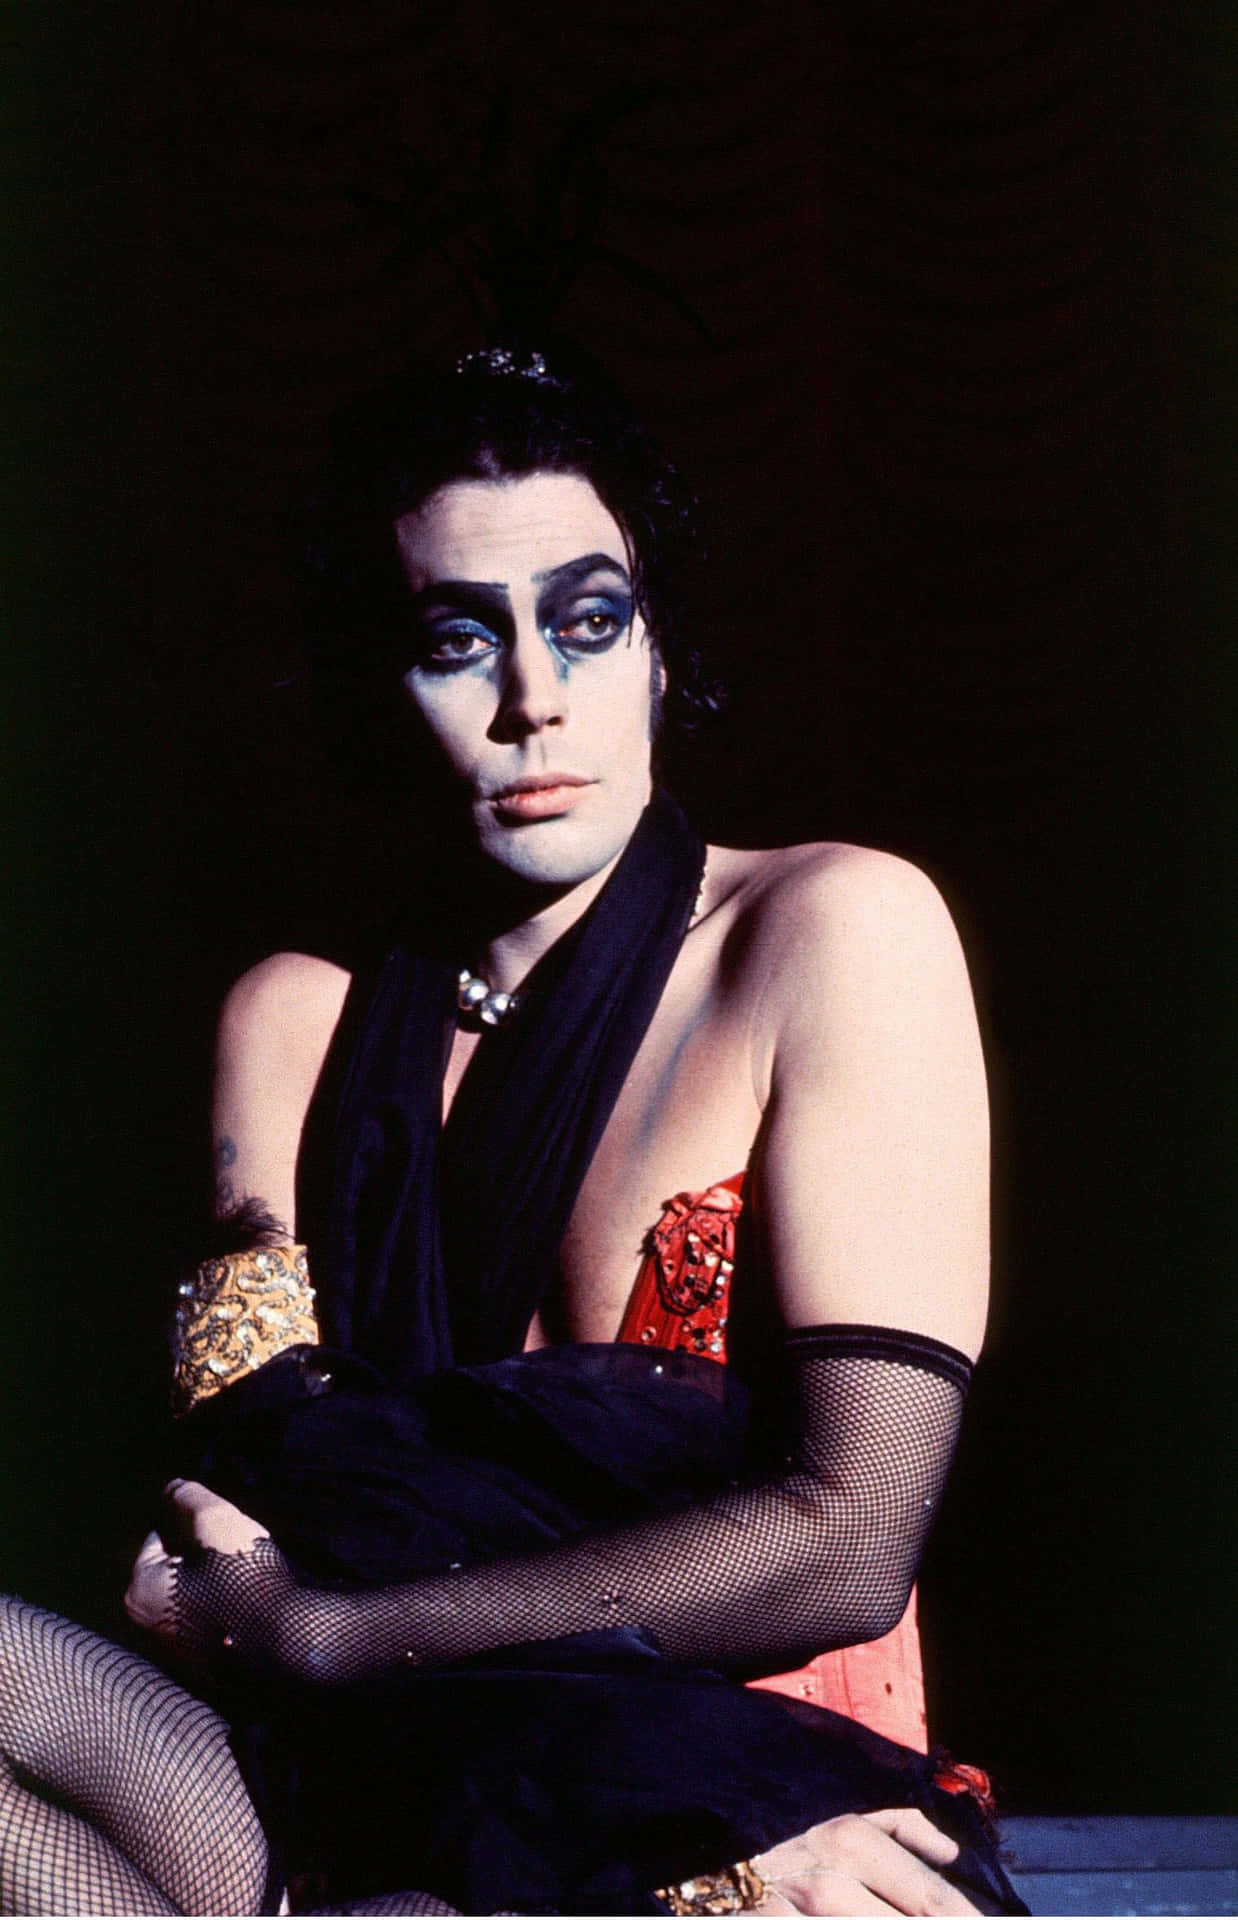 Legendary actor Tim Curry in an iconic pose. Wallpaper